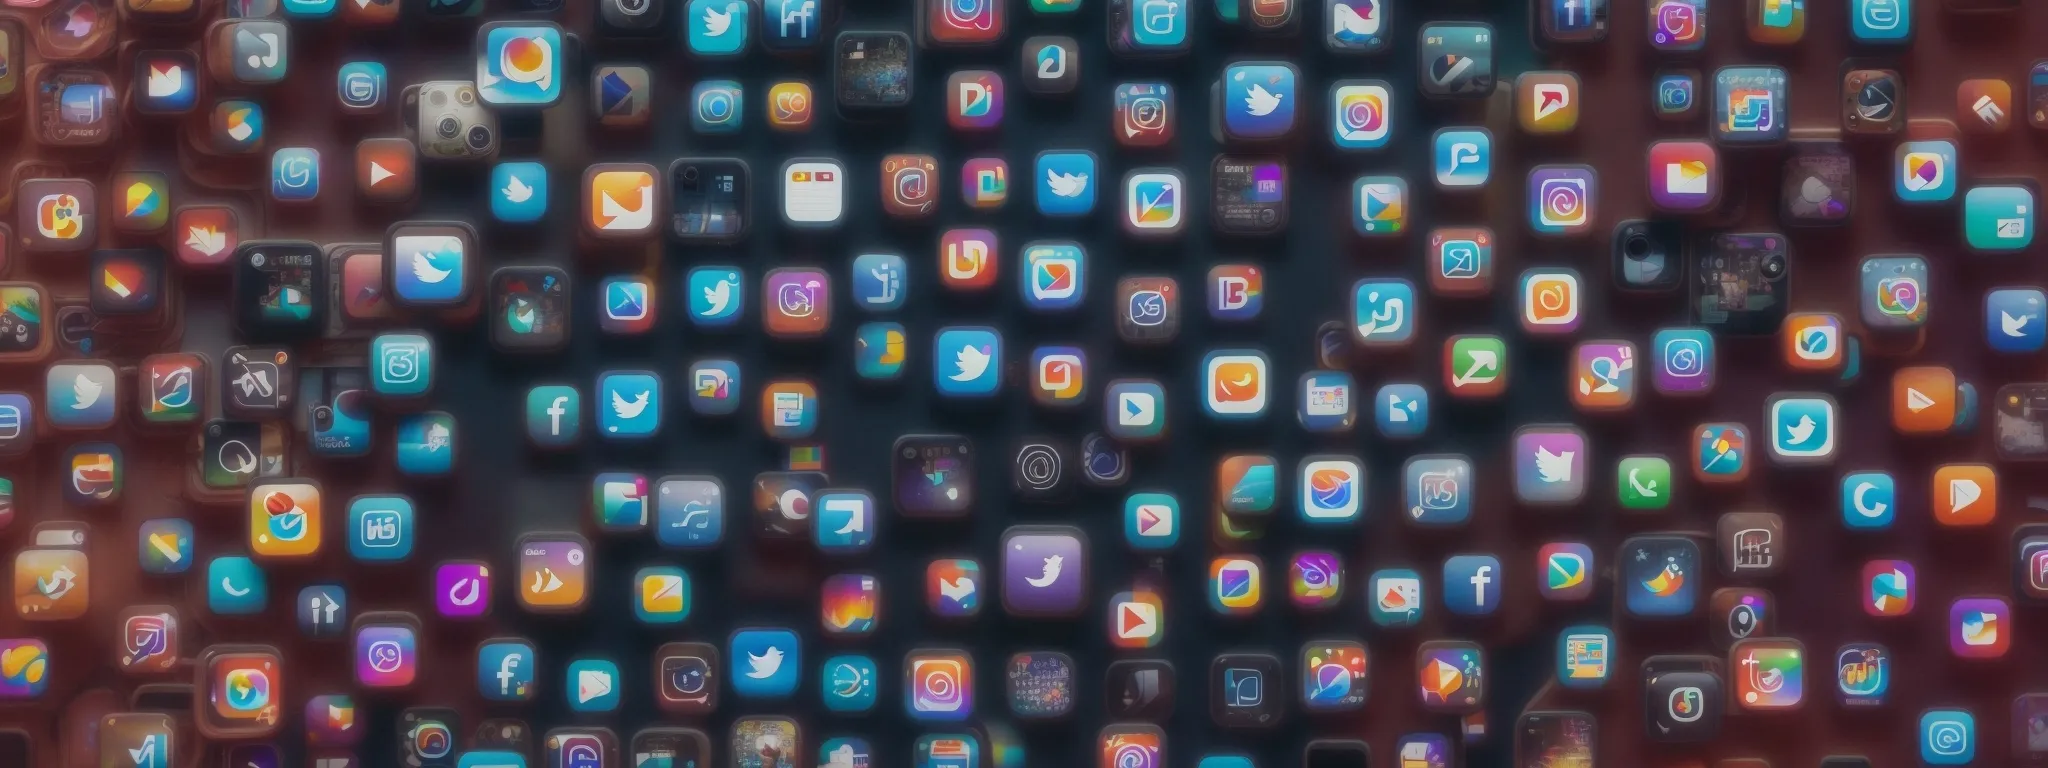 a smartphone displaying an array of colorful social media app icons on its screen, with a magnifying glass hovering above showcasing the connection between social media and seo.